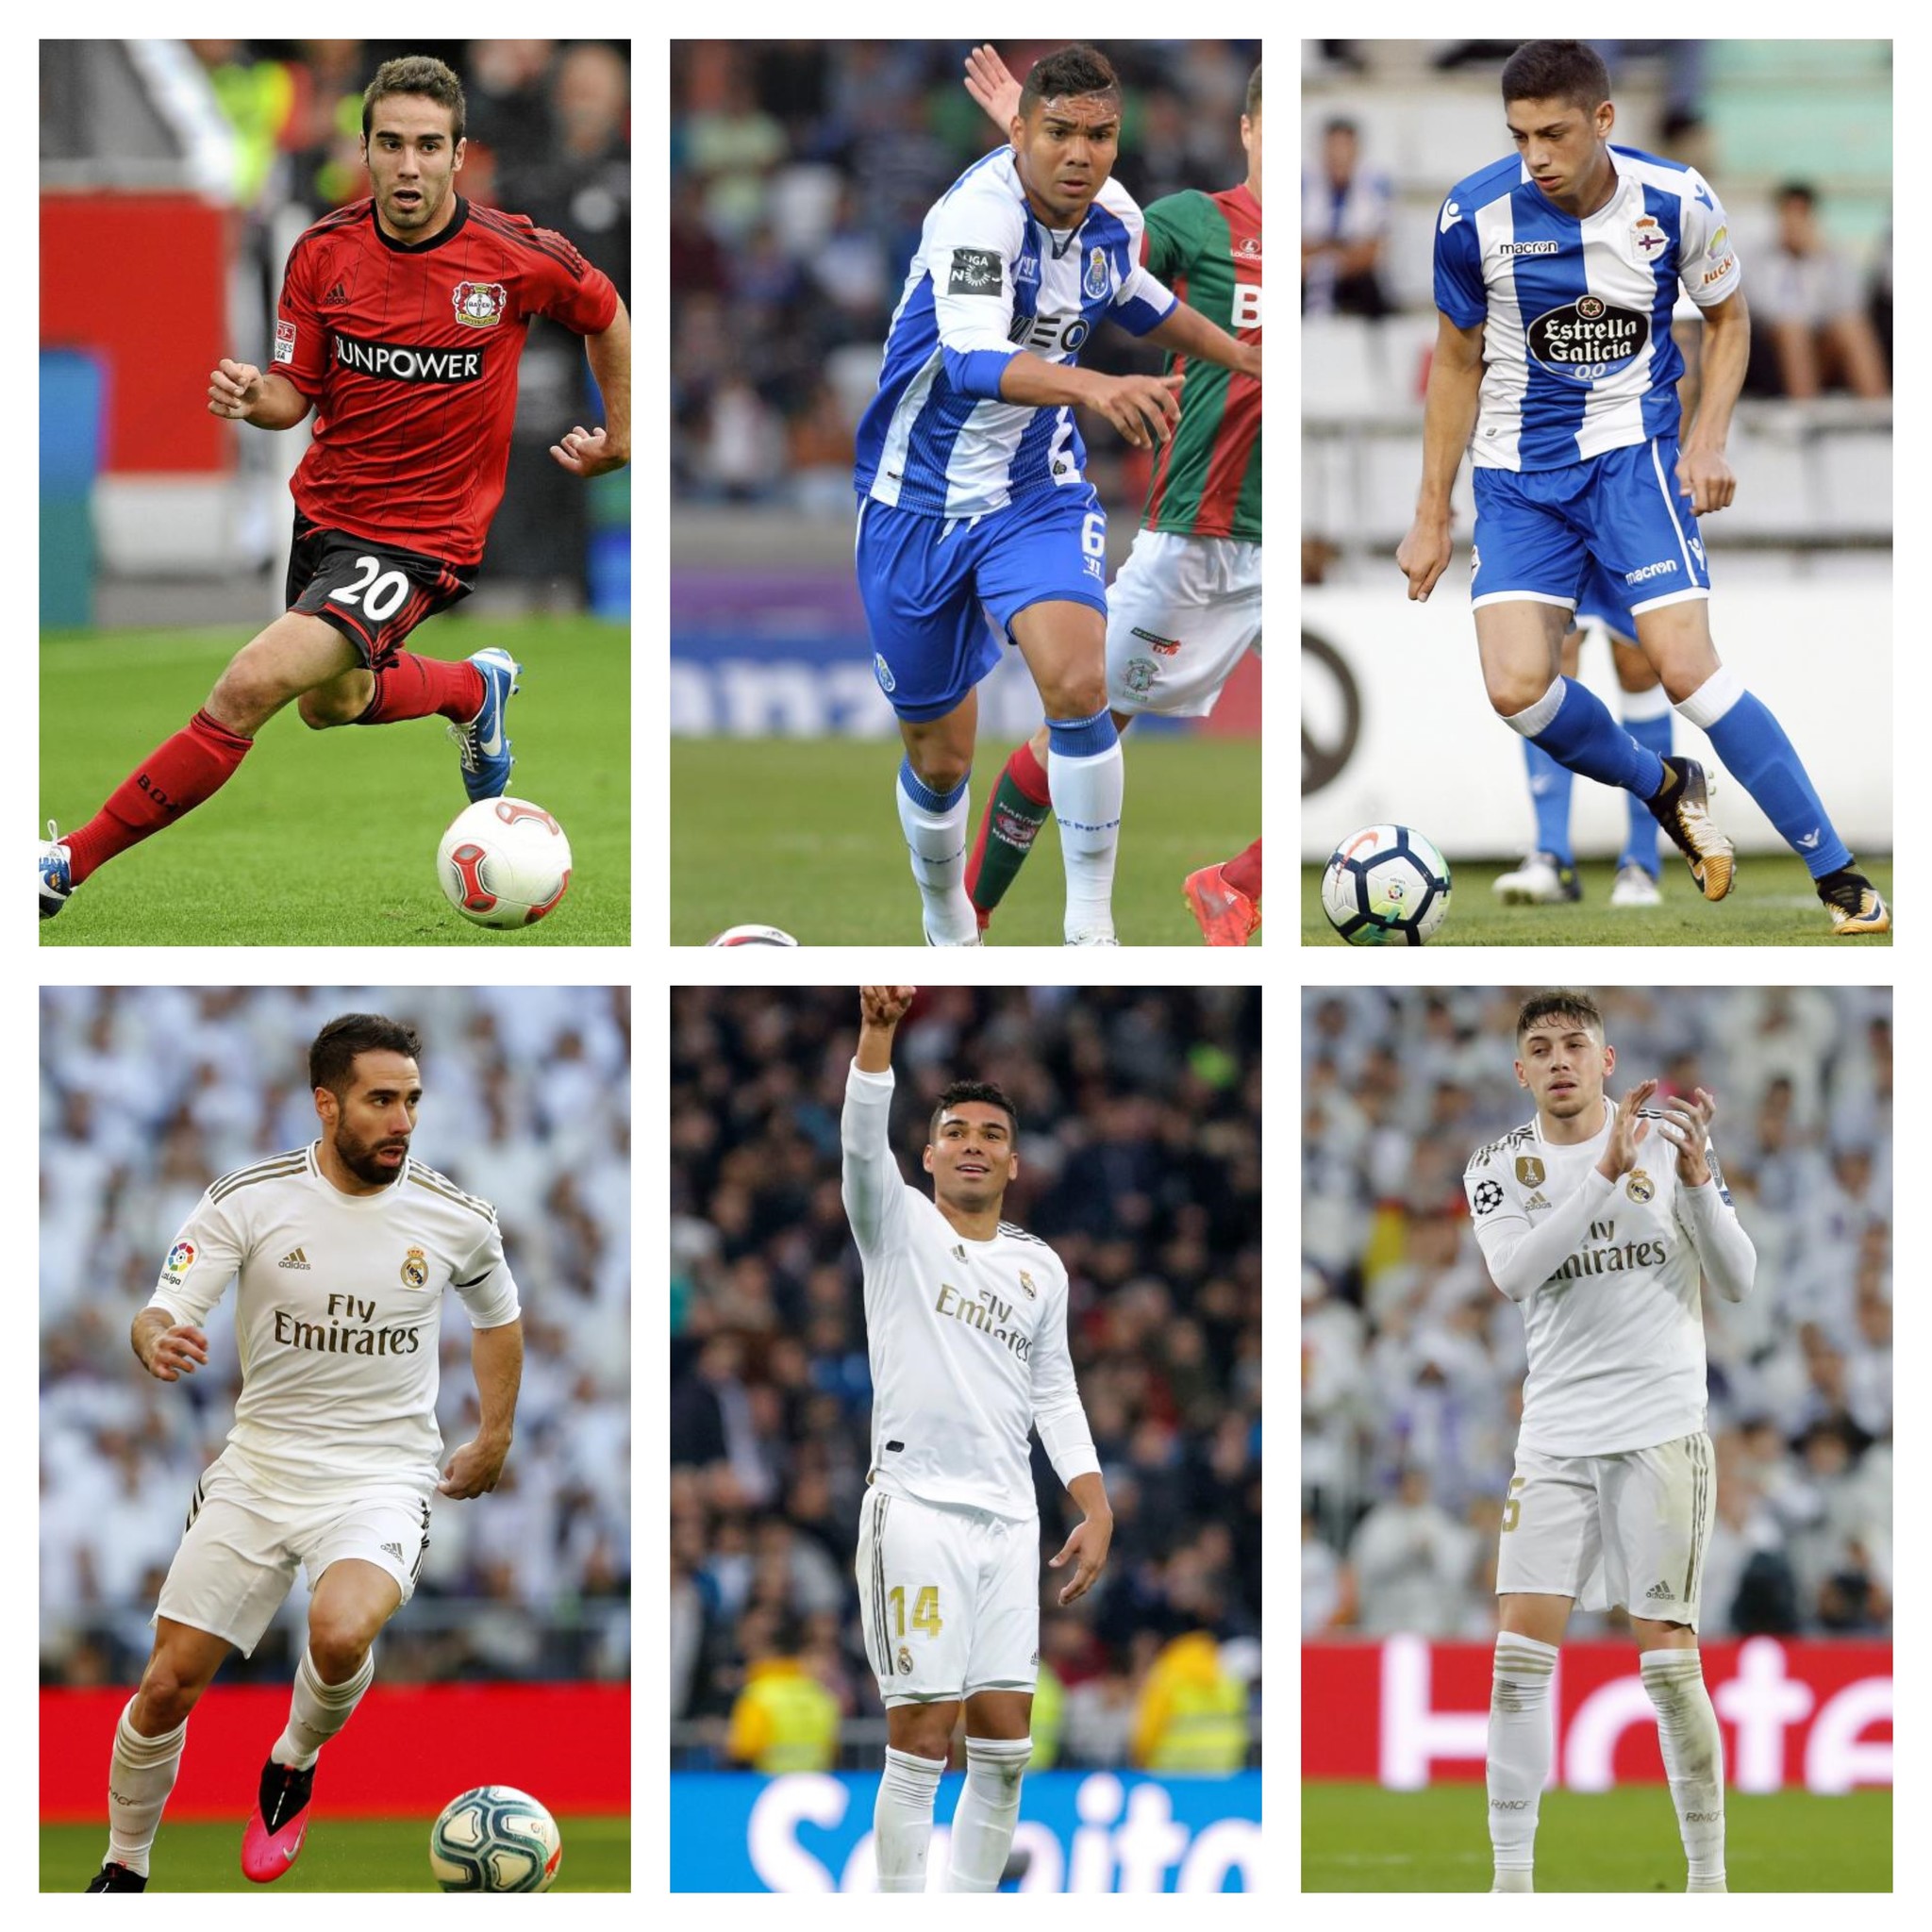 Real Madrid: The 10 Real Madrid players that MARCA readers would